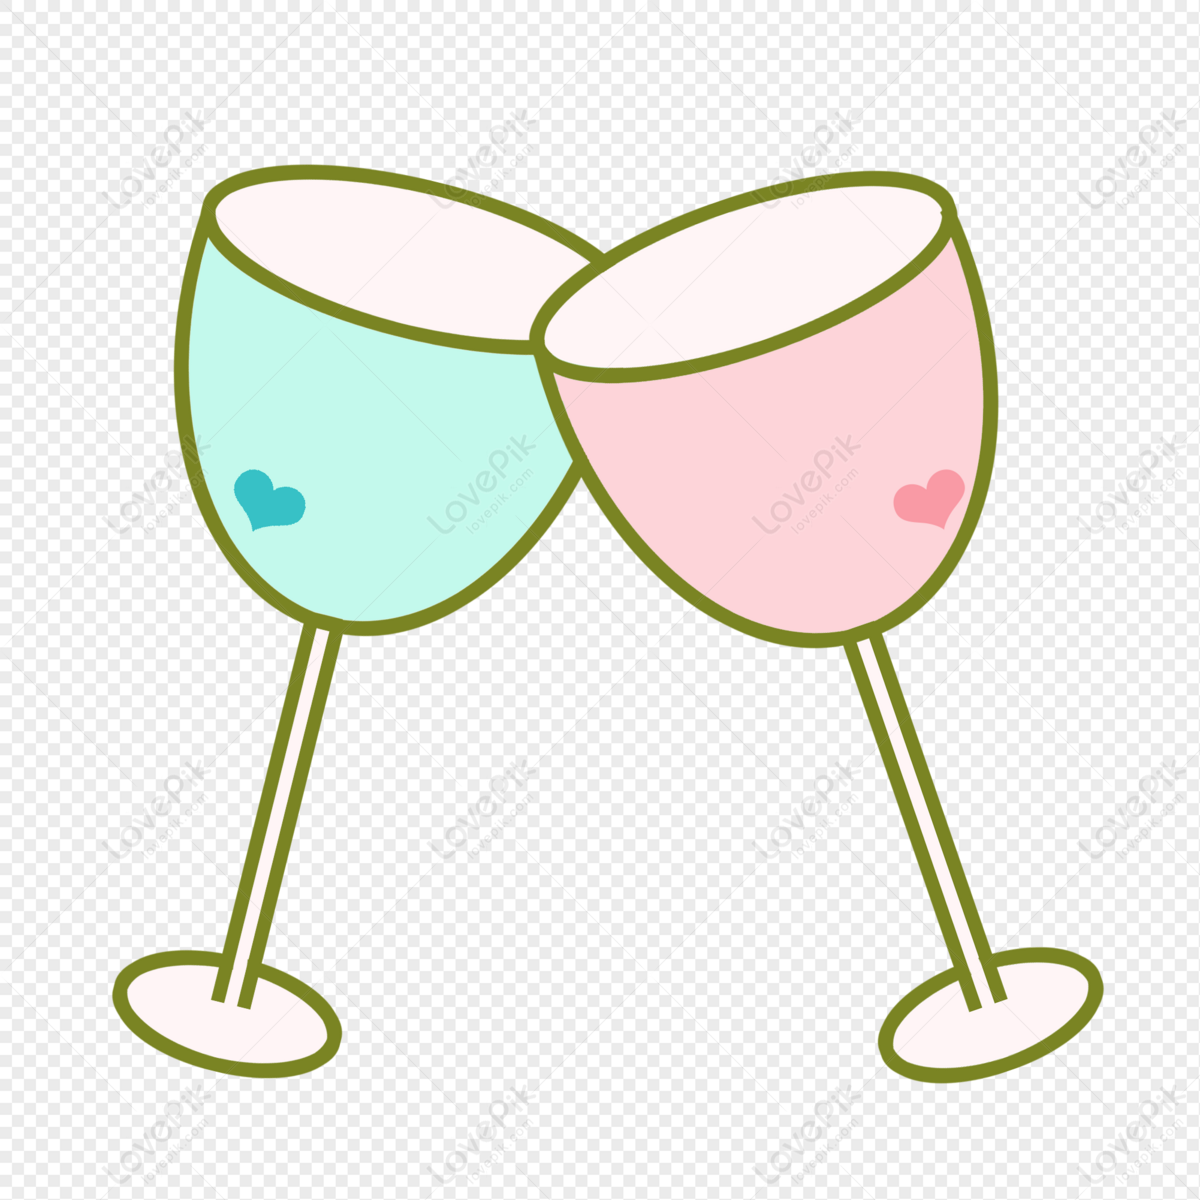 Wine Glass PNG Transparent Image And Clipart Image For Free Download -  Lovepik | 401226487